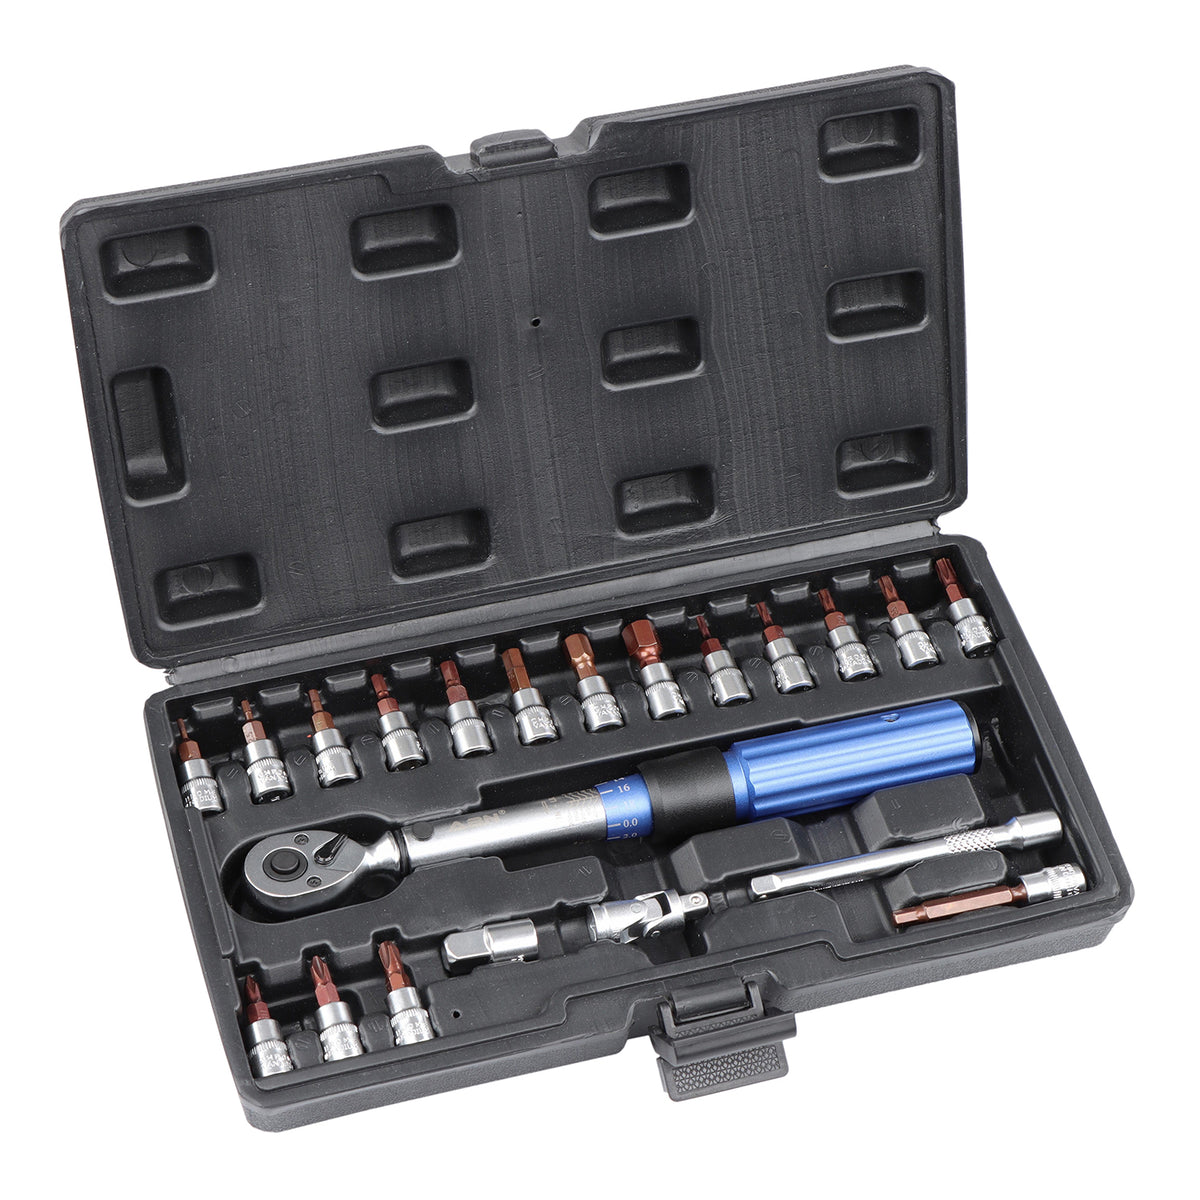 90 Tooth Torque Wrench 1/4 Drive Set - 20-200Inch-Pound Torque Wrench